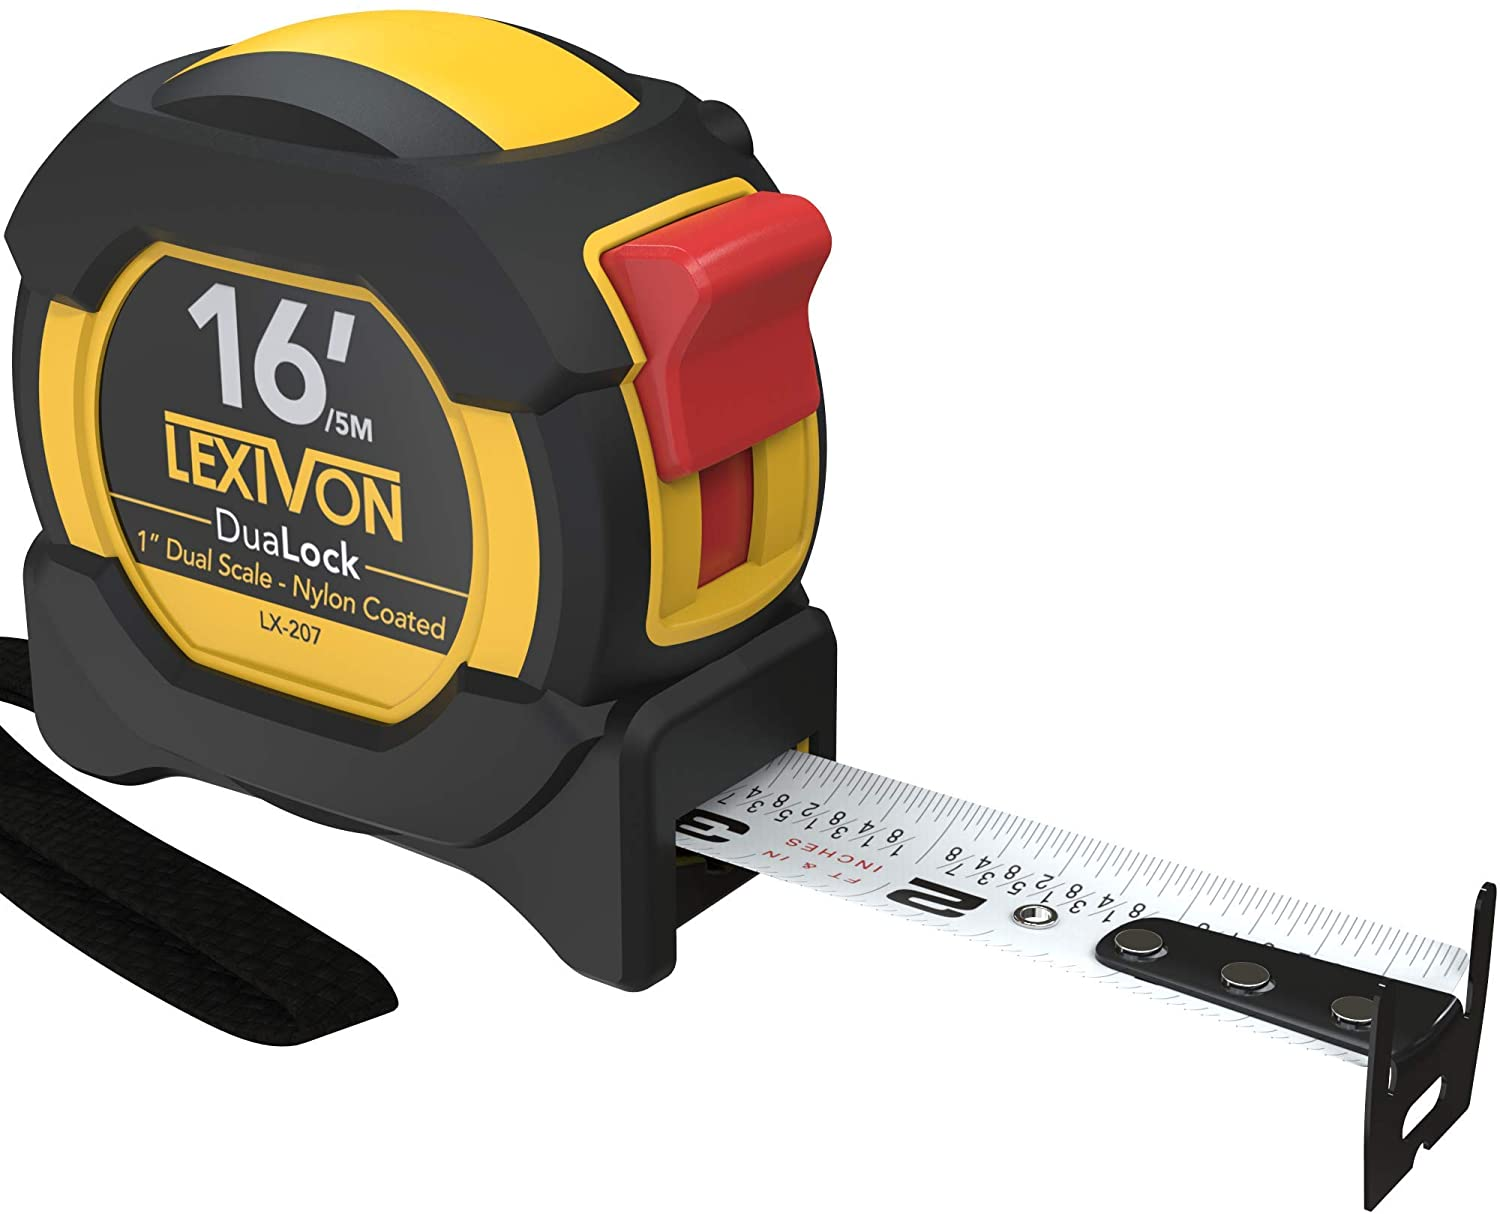 LEXIVON 16Ft/5m DuaLock Tape Measure | 1-Inch Wide Blade with Nylon Coating, Matt Finish White & Yellow Dual Sided Rule Print | Ft/Inch/Fractions/Metric (LX-207)